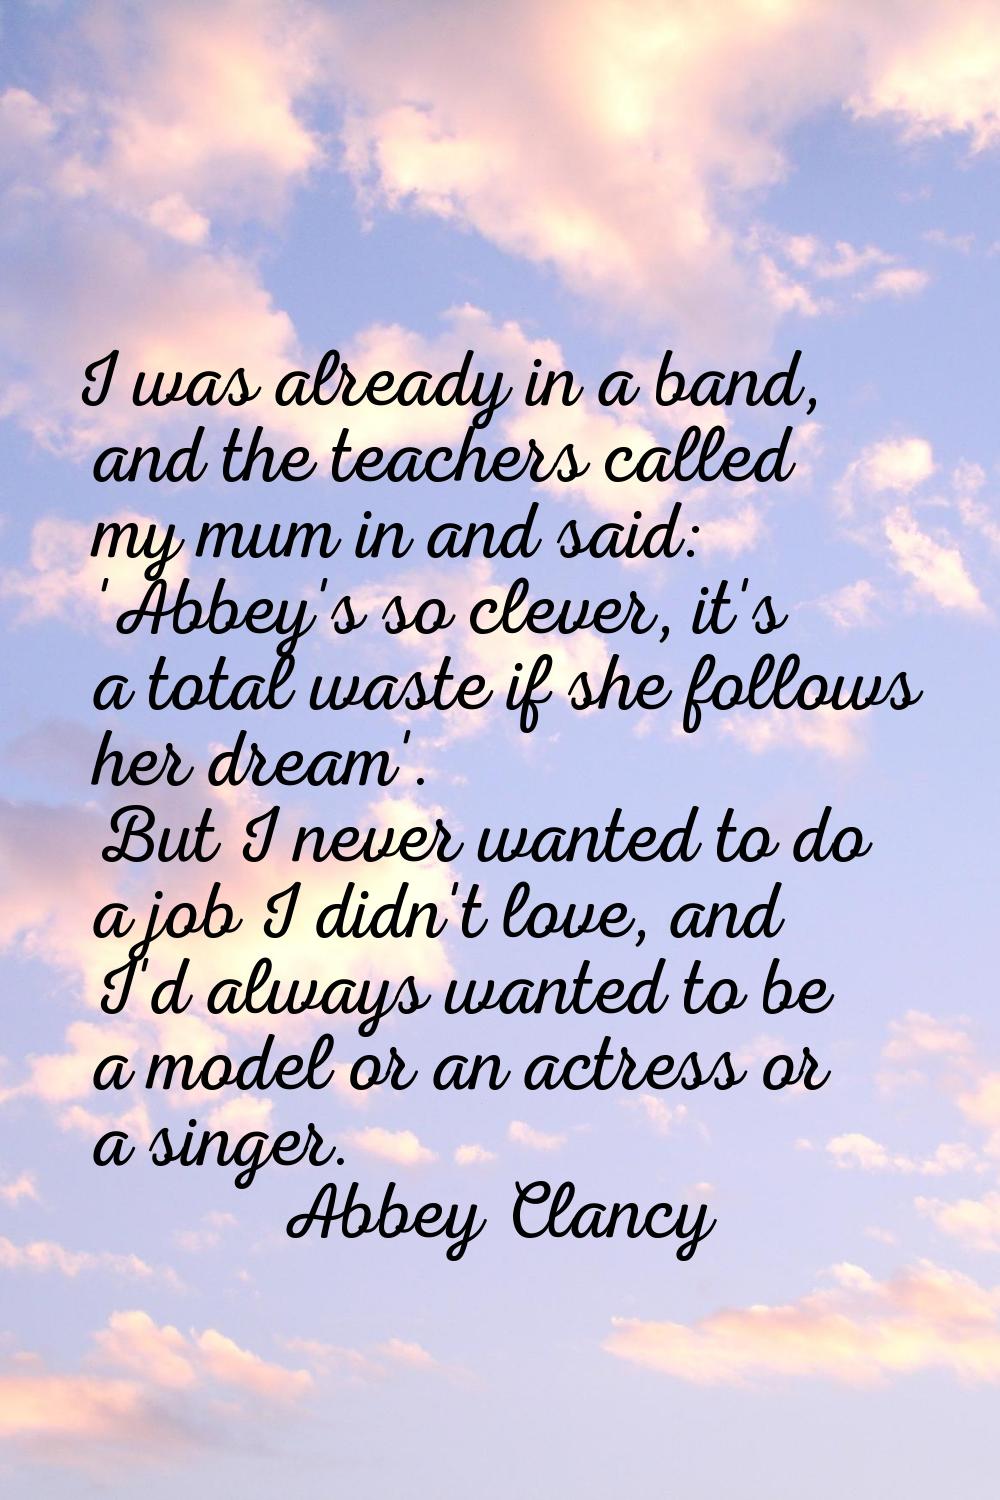 I was already in a band, and the teachers called my mum in and said: 'Abbey's so clever, it's a tot